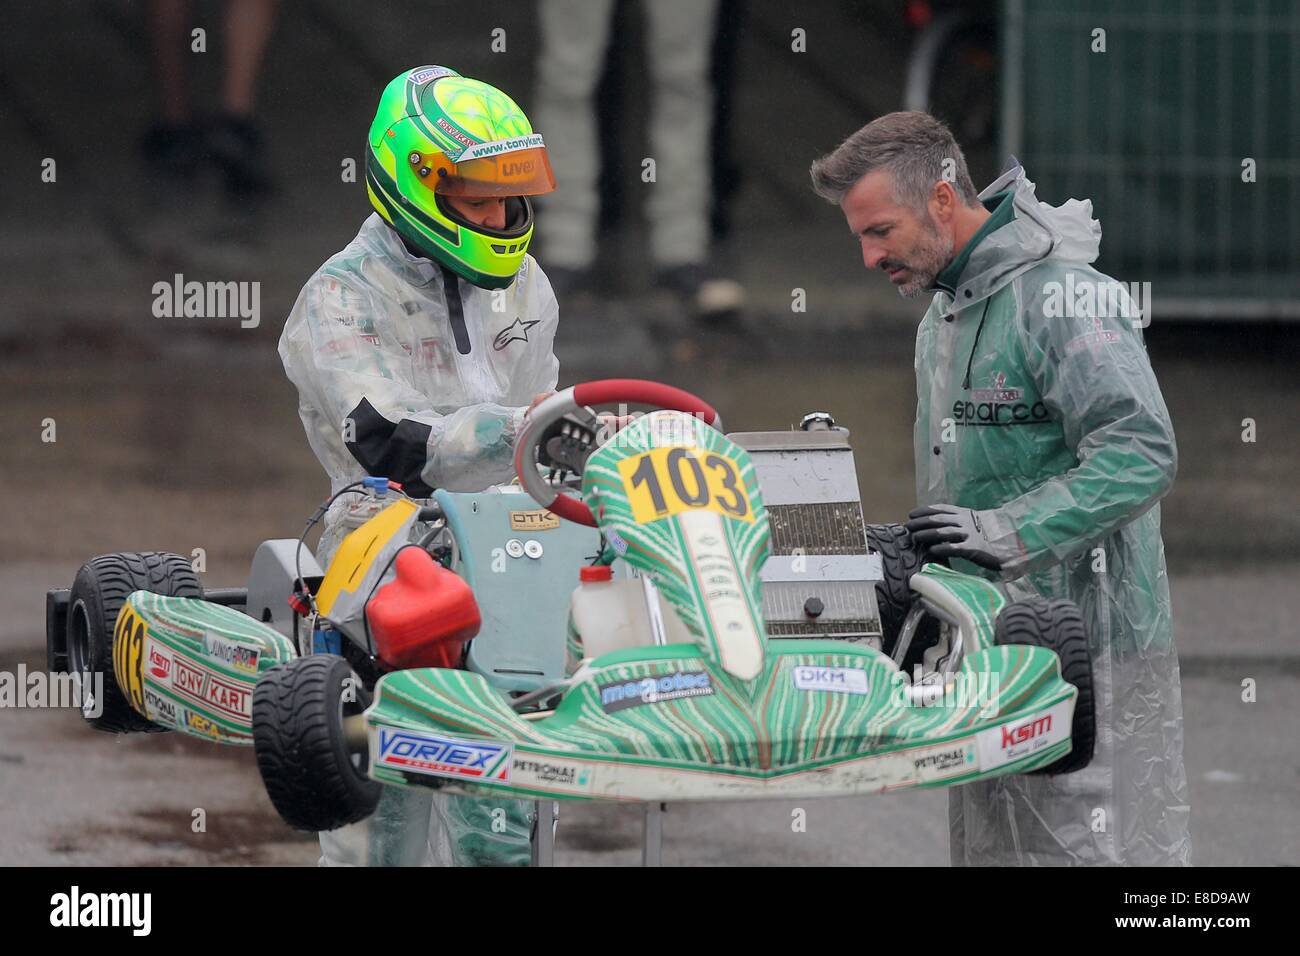 Mick Schumacher (l) of Germany, named as Mick Junior, of KSM Racing Team talks to a technican during the DJKM race at the German Karting Championship on 05 October 2014, in Genk, Belgium. Photo: Fredrik von Erichsen/dpa ( - MANDATORY CREDITS) Stock Photo